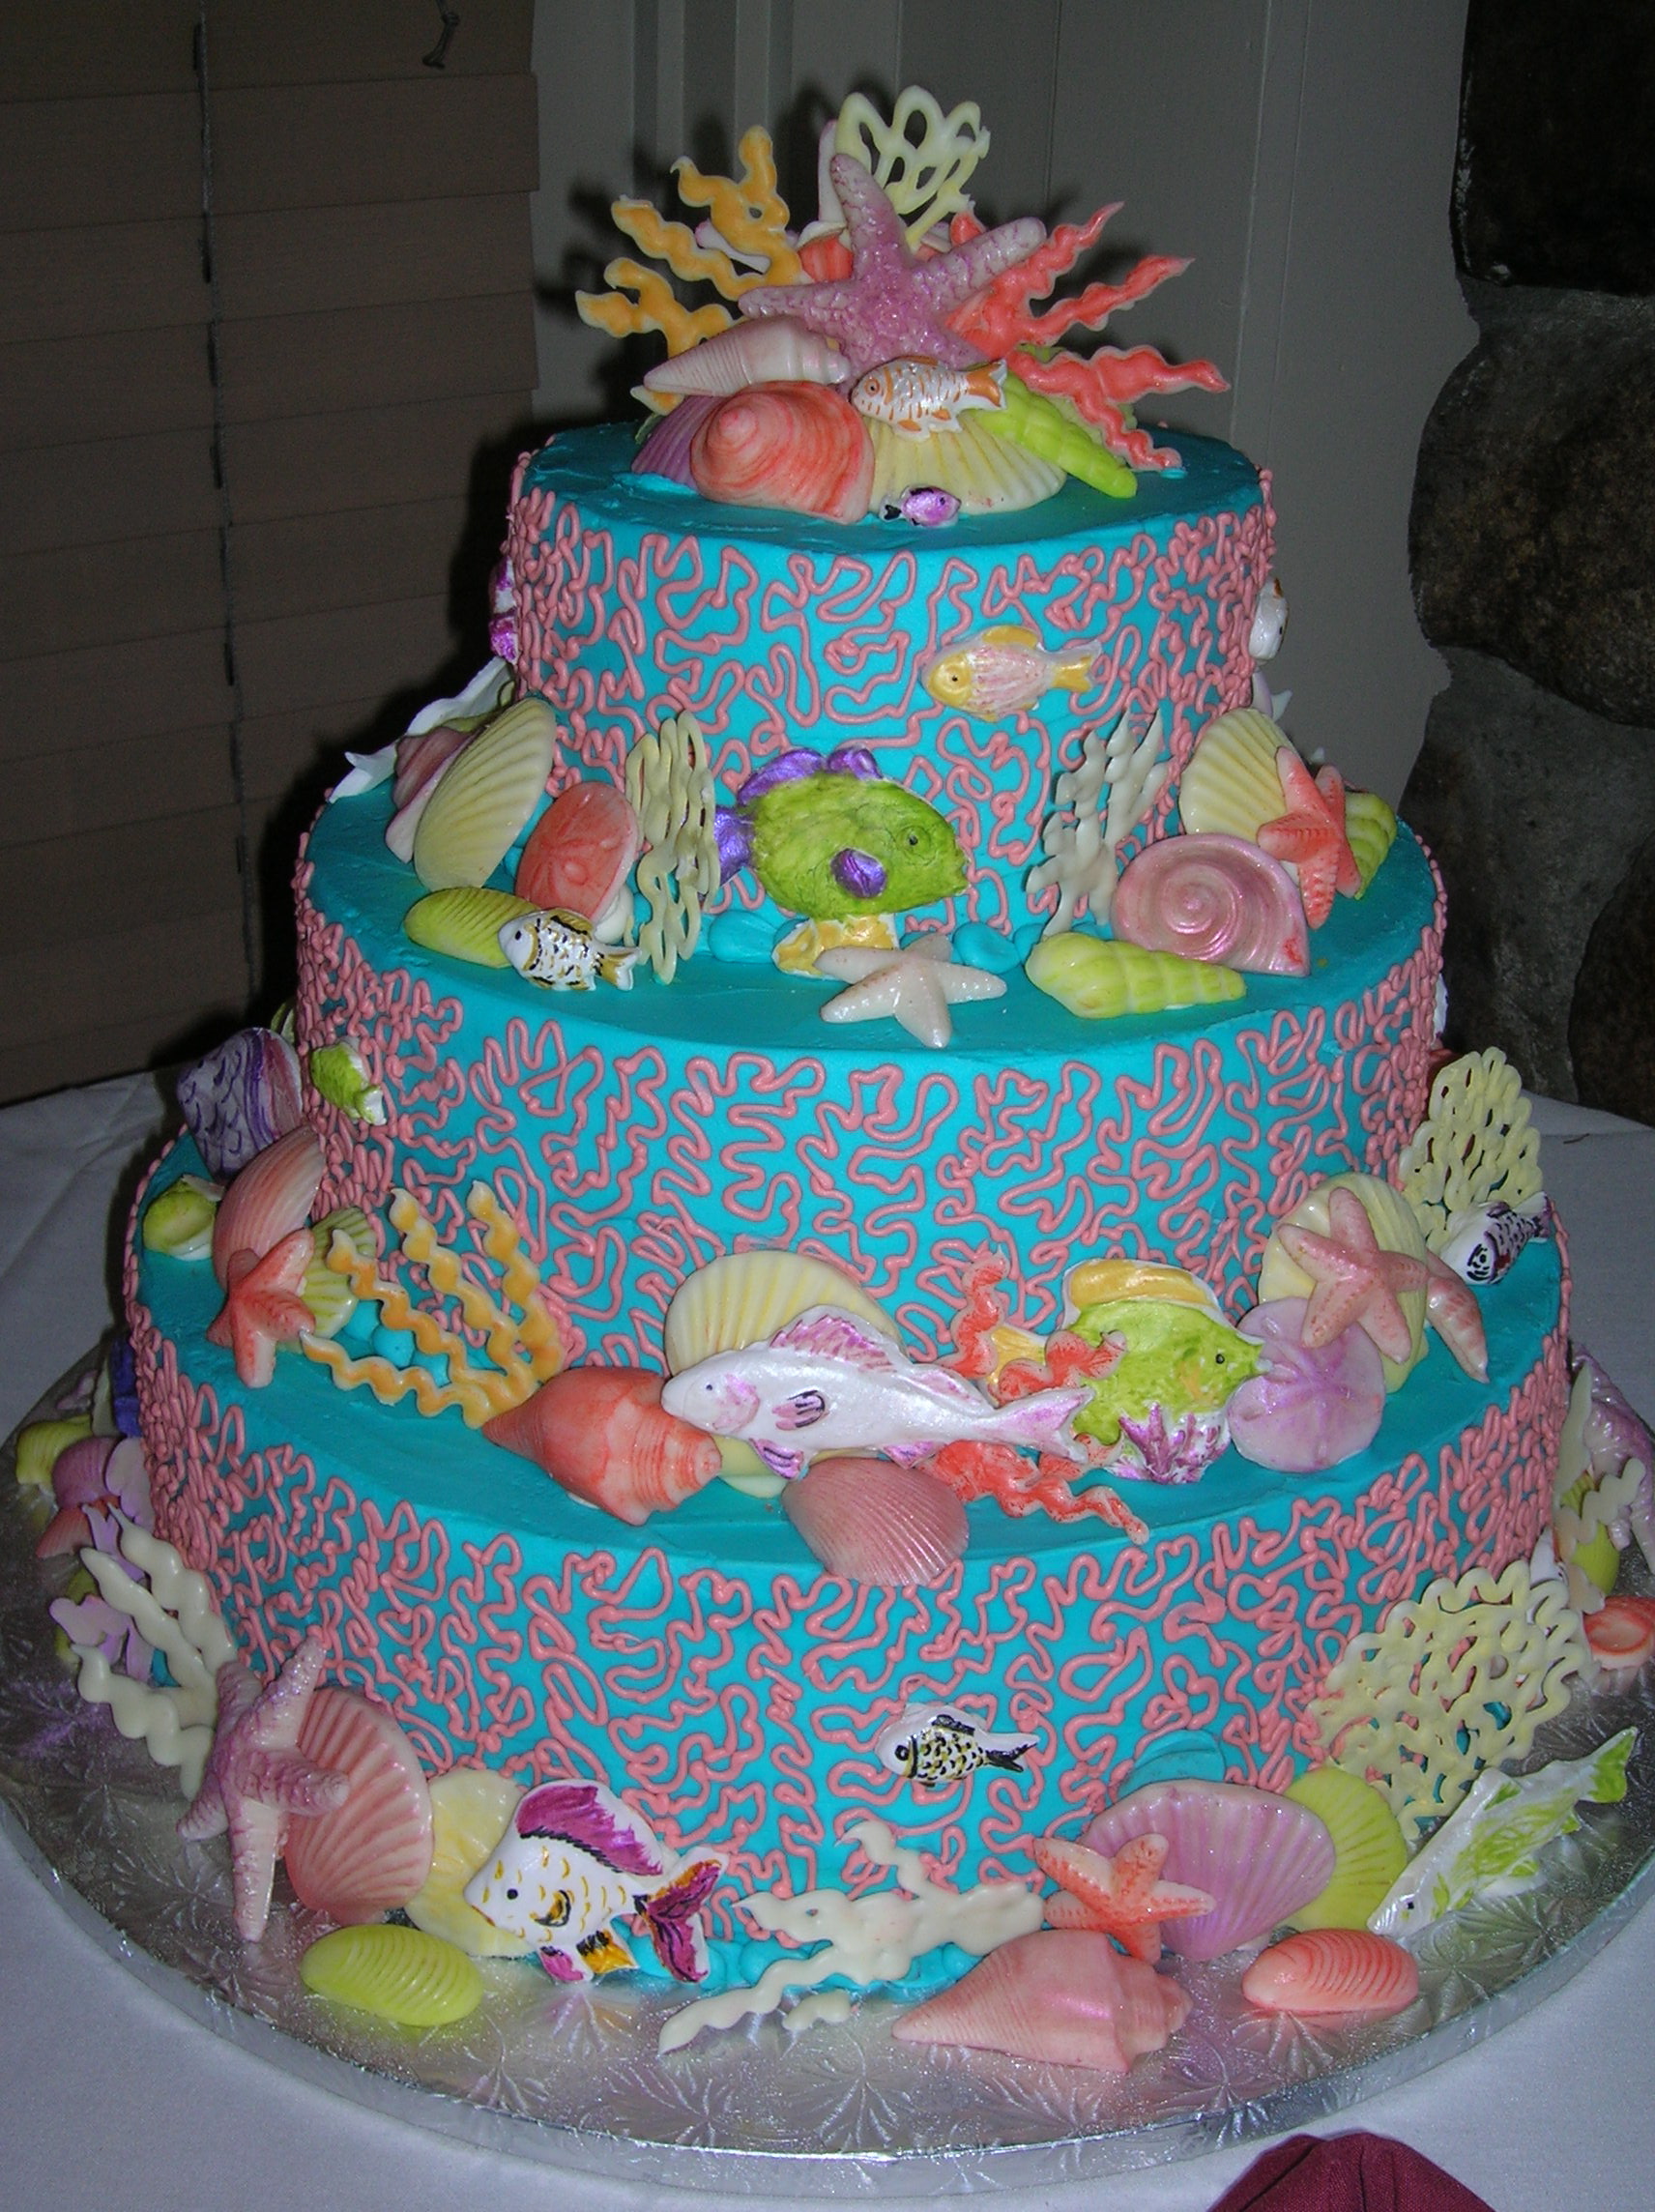 5 Photos of Cake Themed Cakes